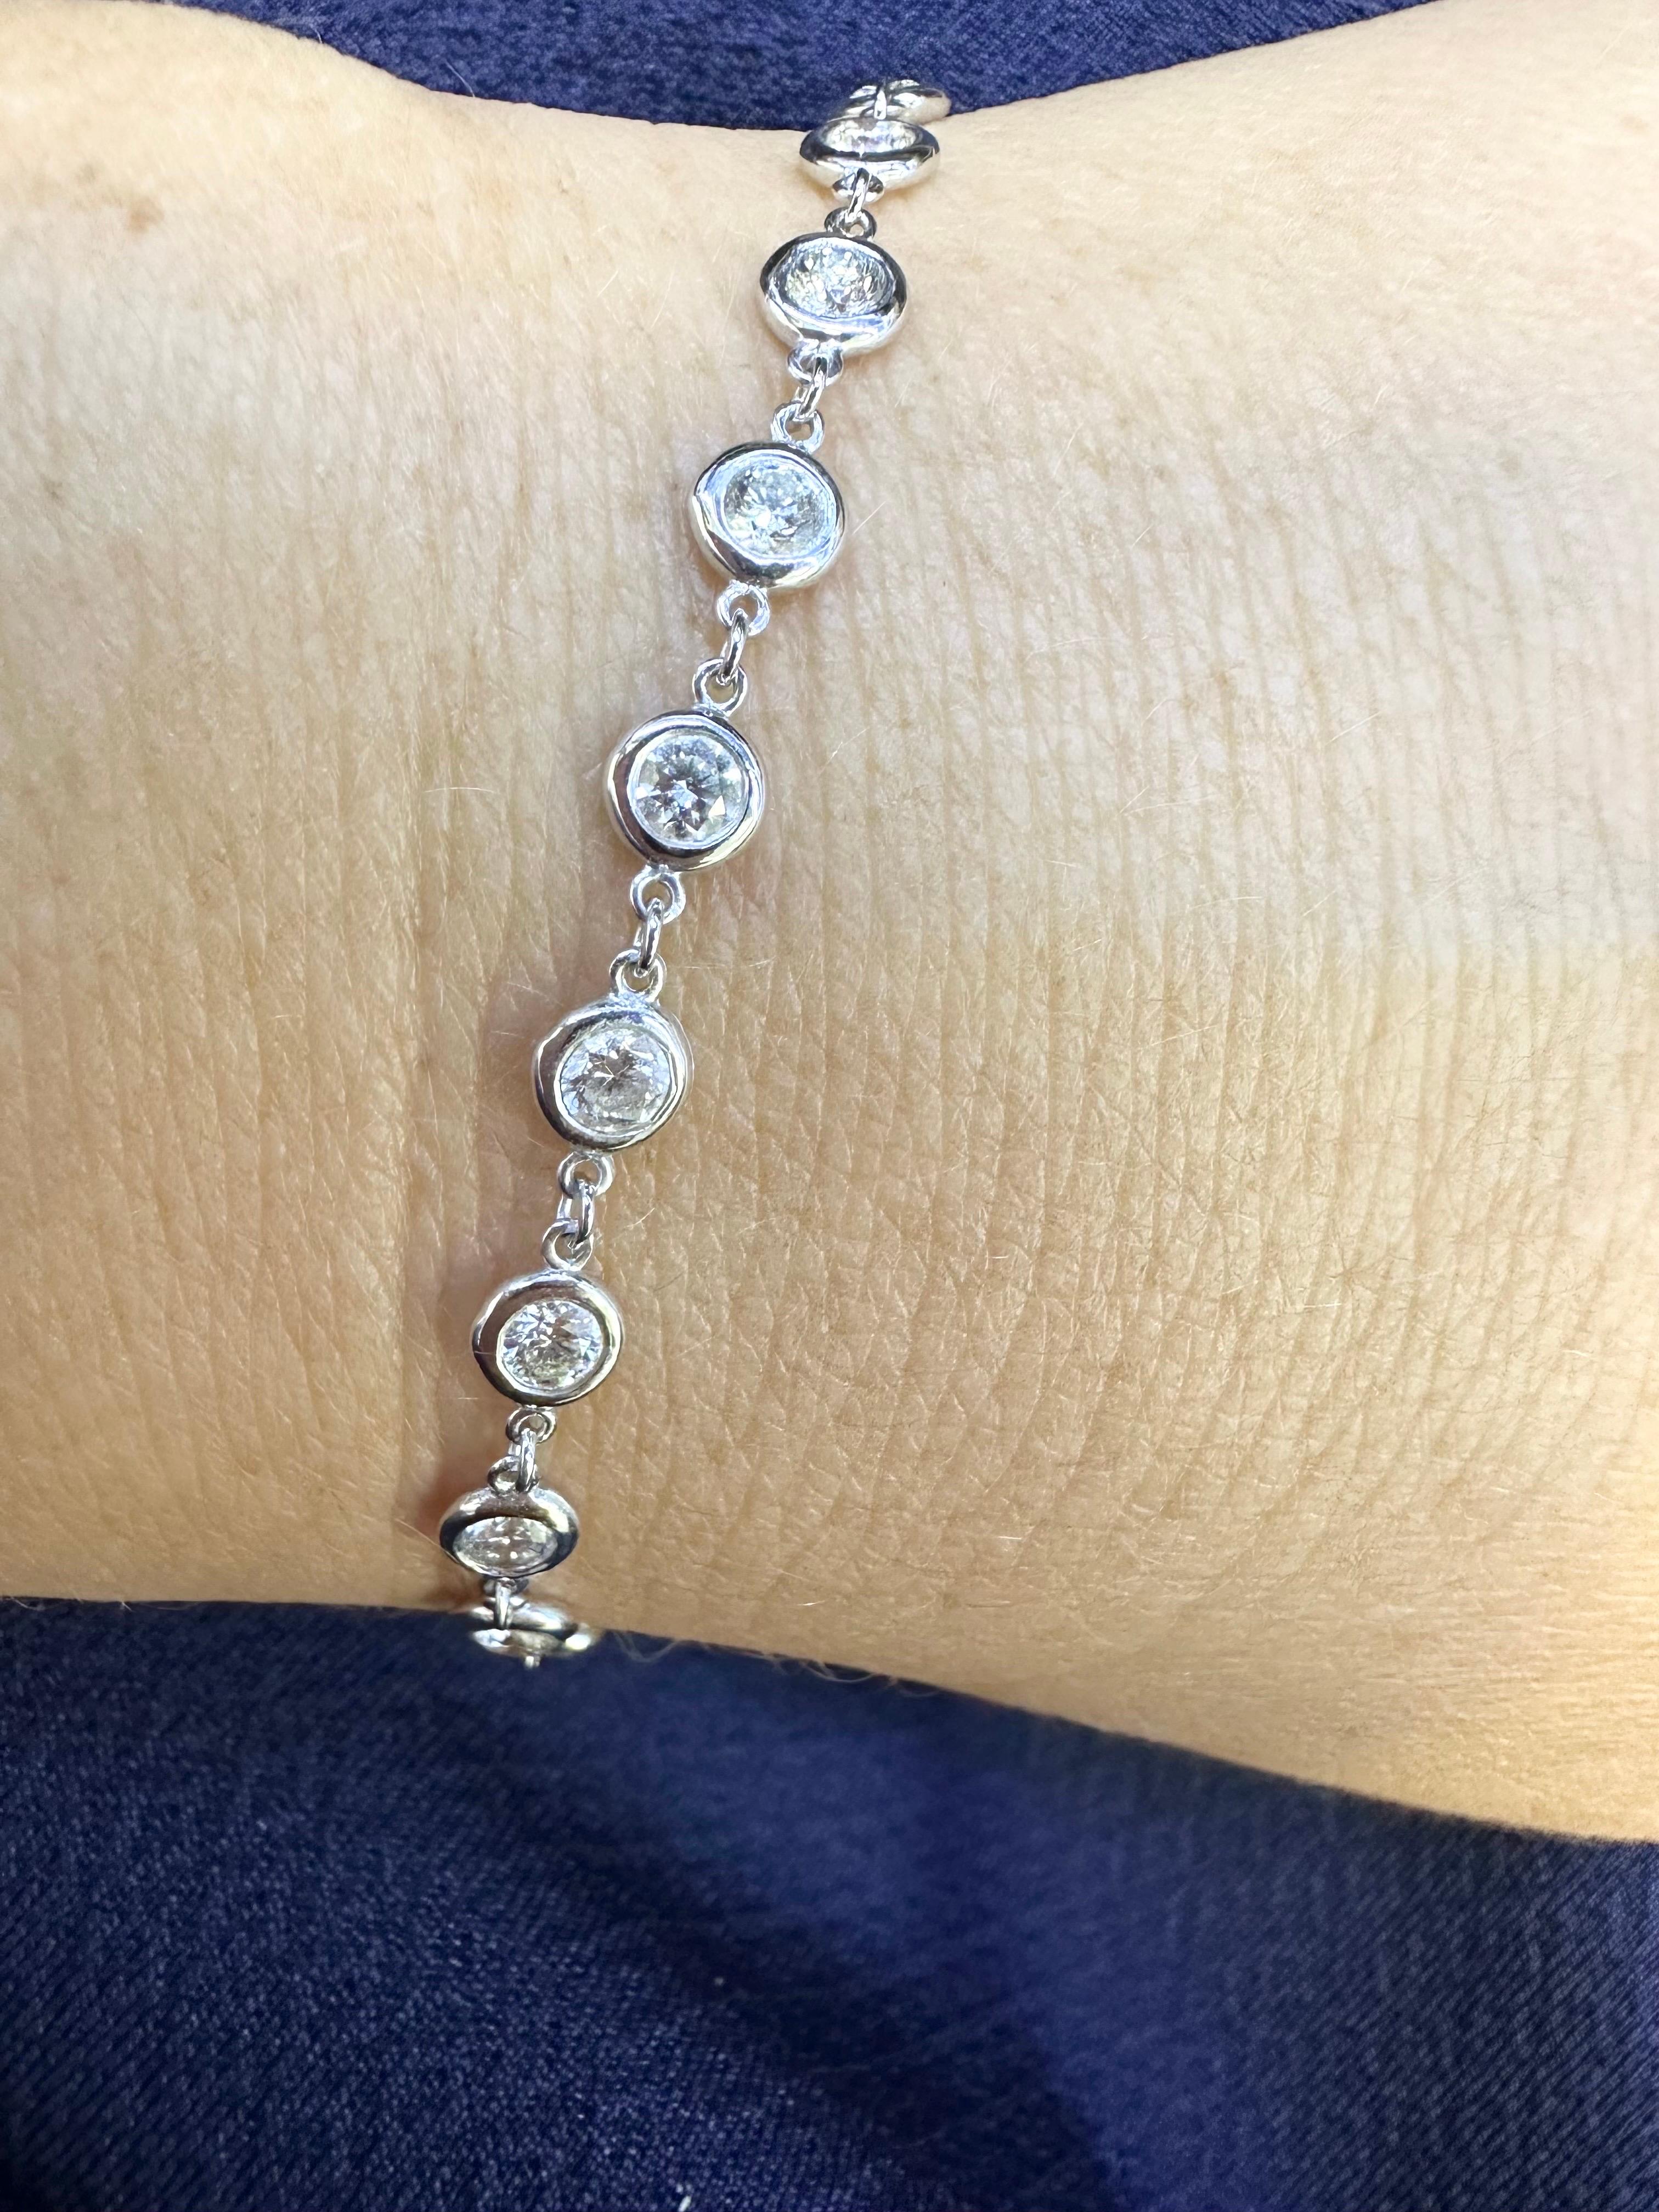 Bezel set bracelet 2 carats of Si clarity diamonds in 14KT white gold.
Certificate of authenticity comes with purchase!

ABOUT US
We are a family-owned business. Our studio in located in the heart of Boca Raton at the International Jewelers